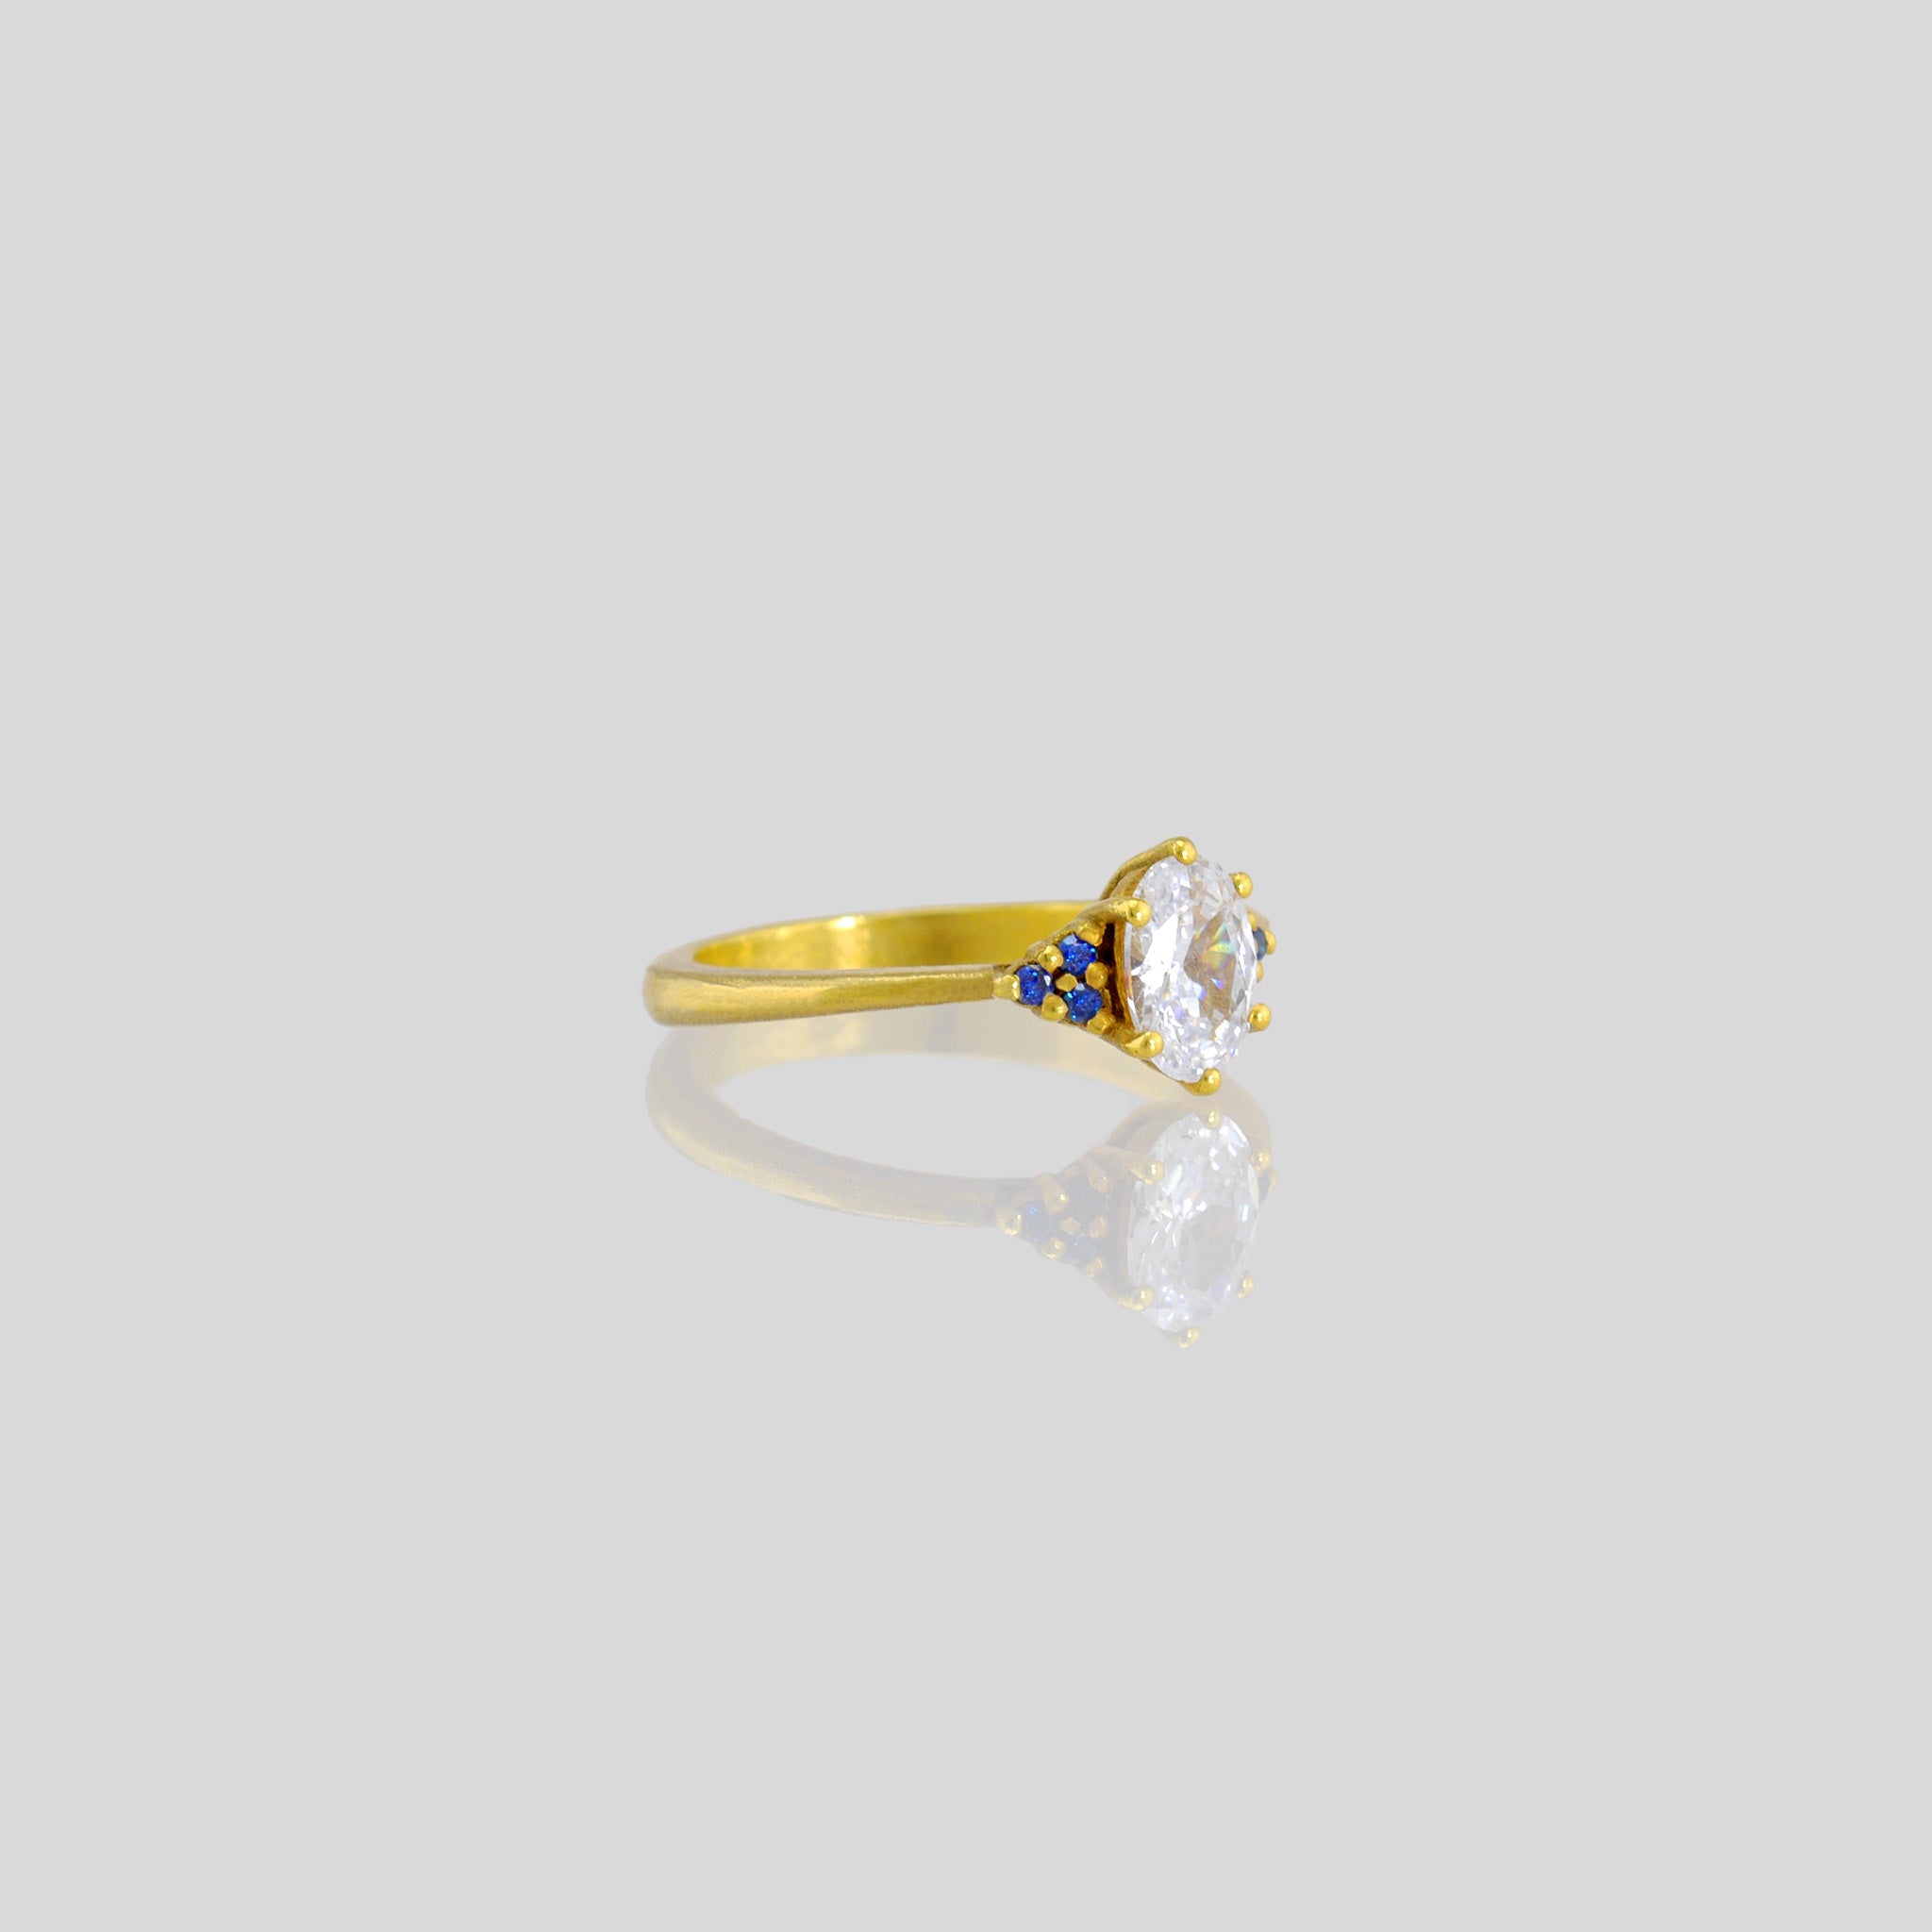 Gold engagement ring with oval central diamond and three tiny Sapphires on each side. Timeless elegance with a touch of color, perfect for an elegant proposal.